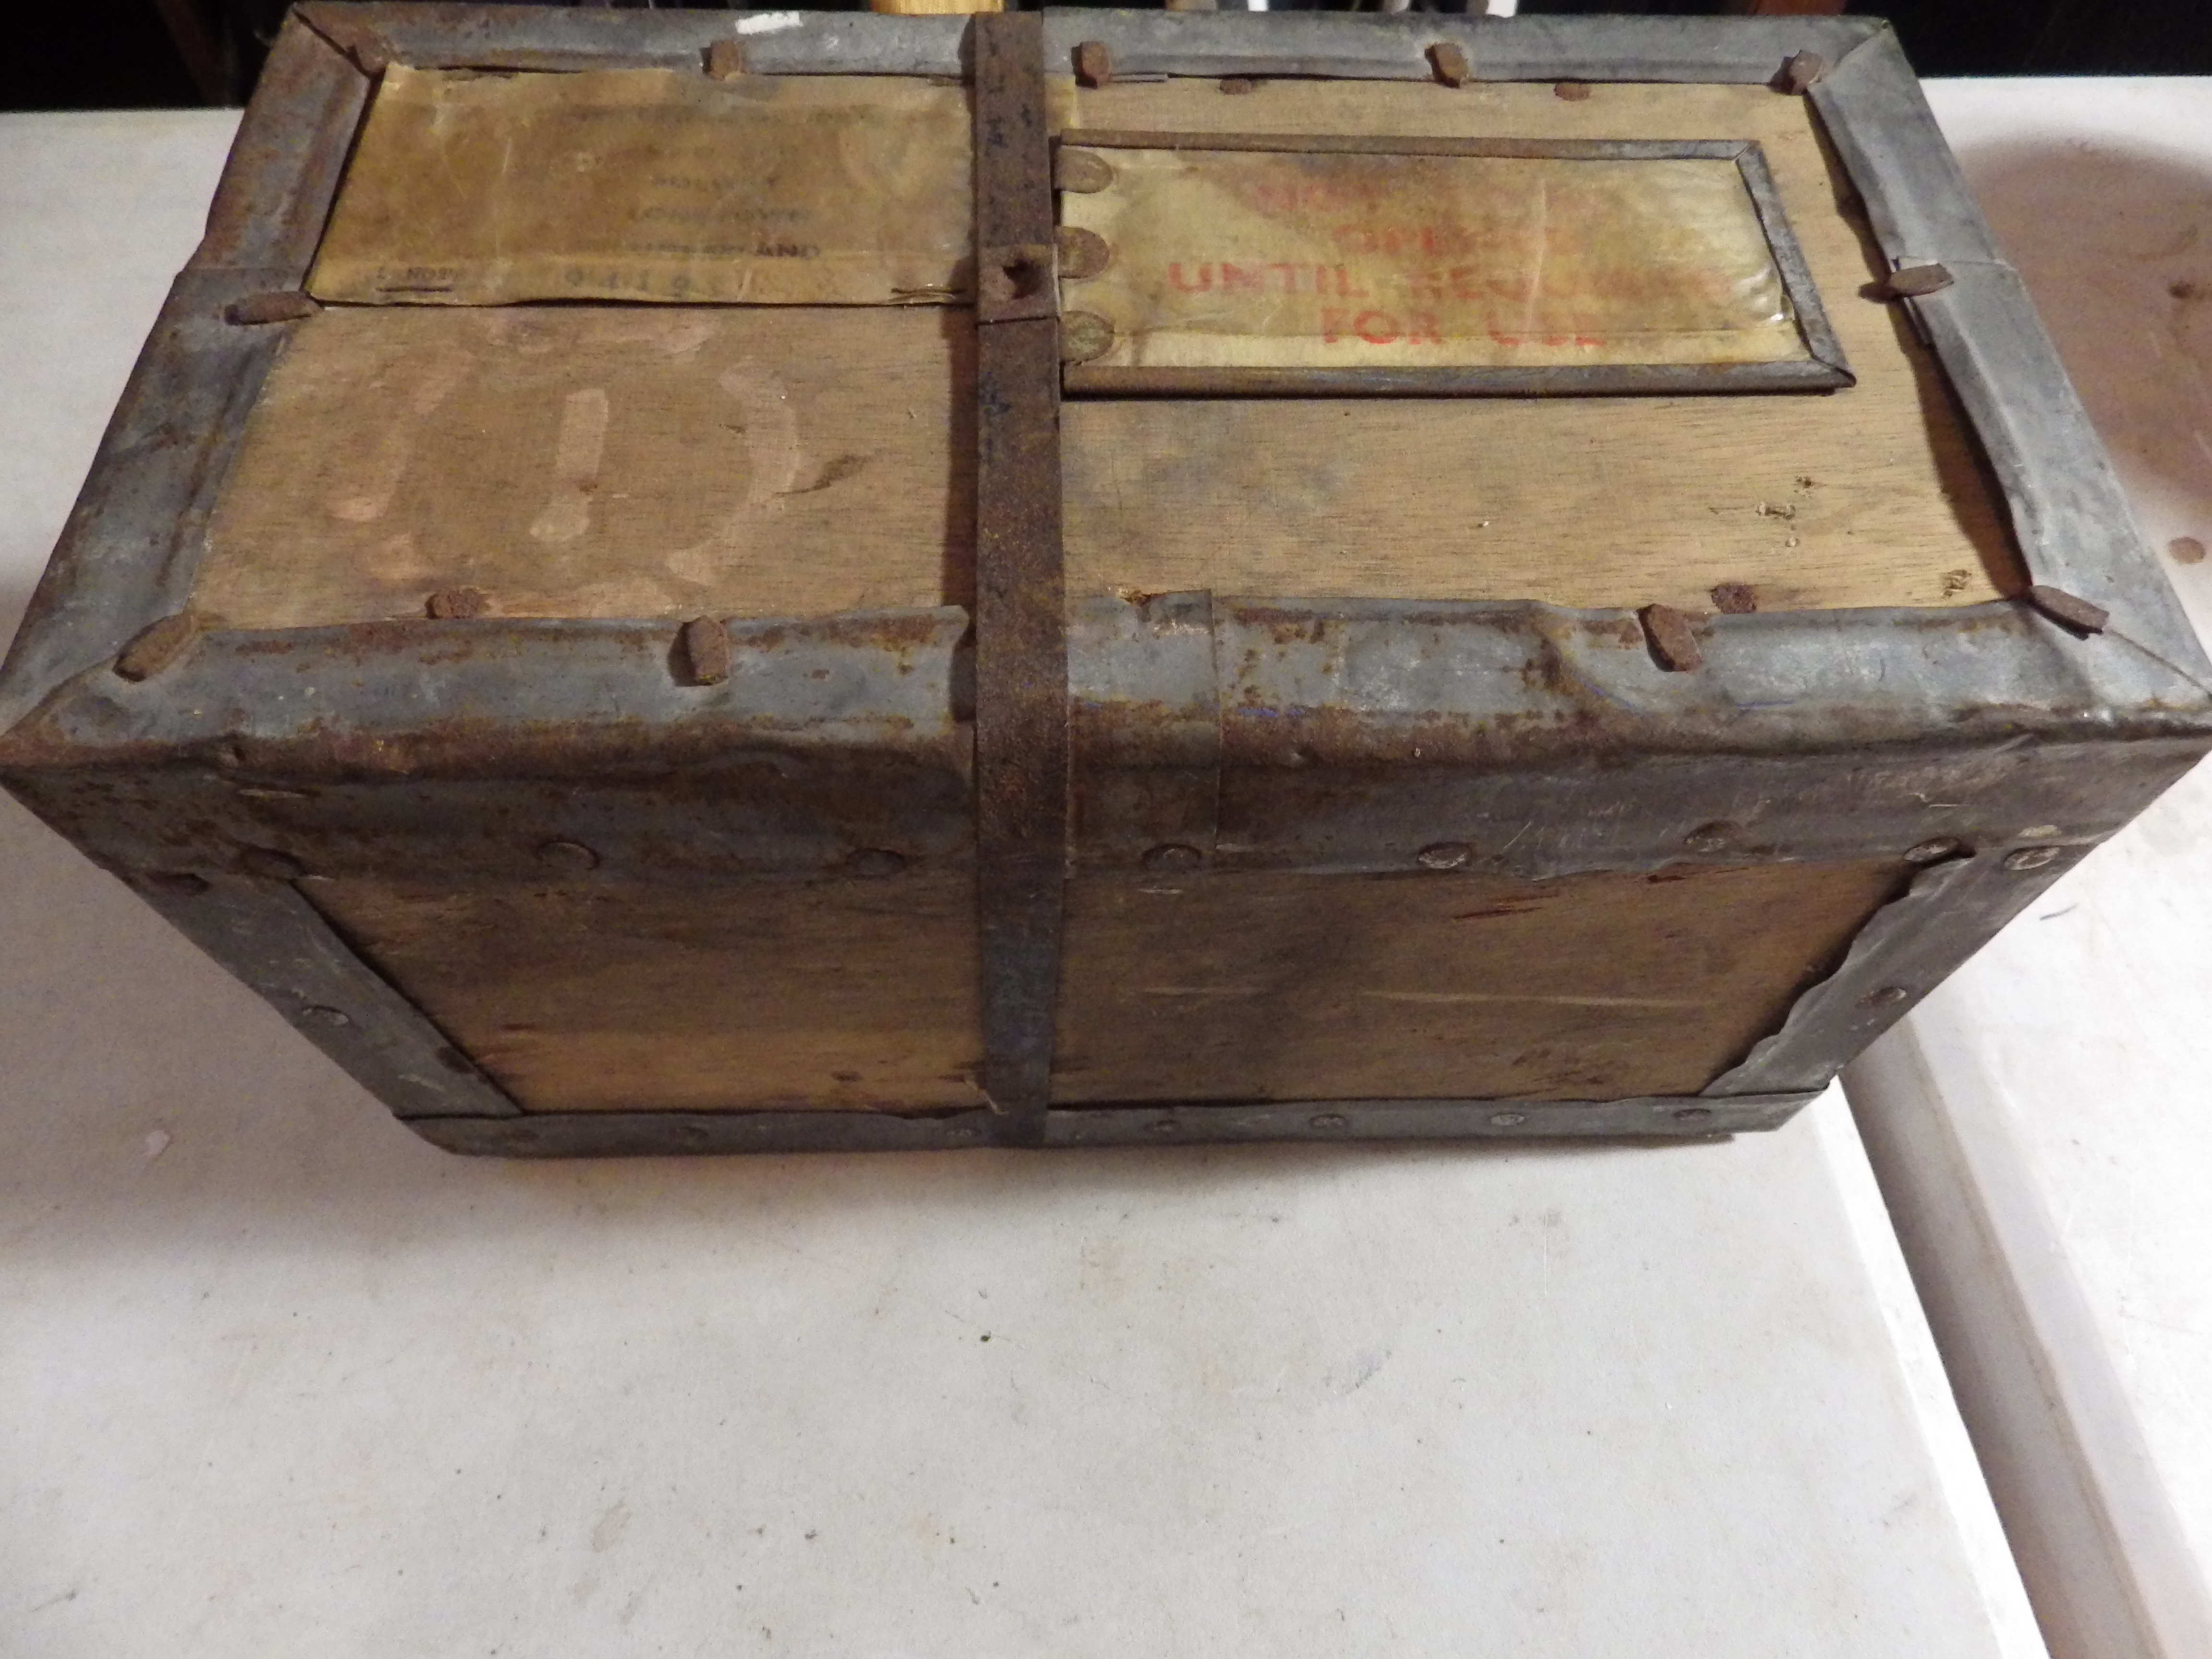 Military G S Co Ltd sealed wood box with metal banding label states containing 5 sad irons (